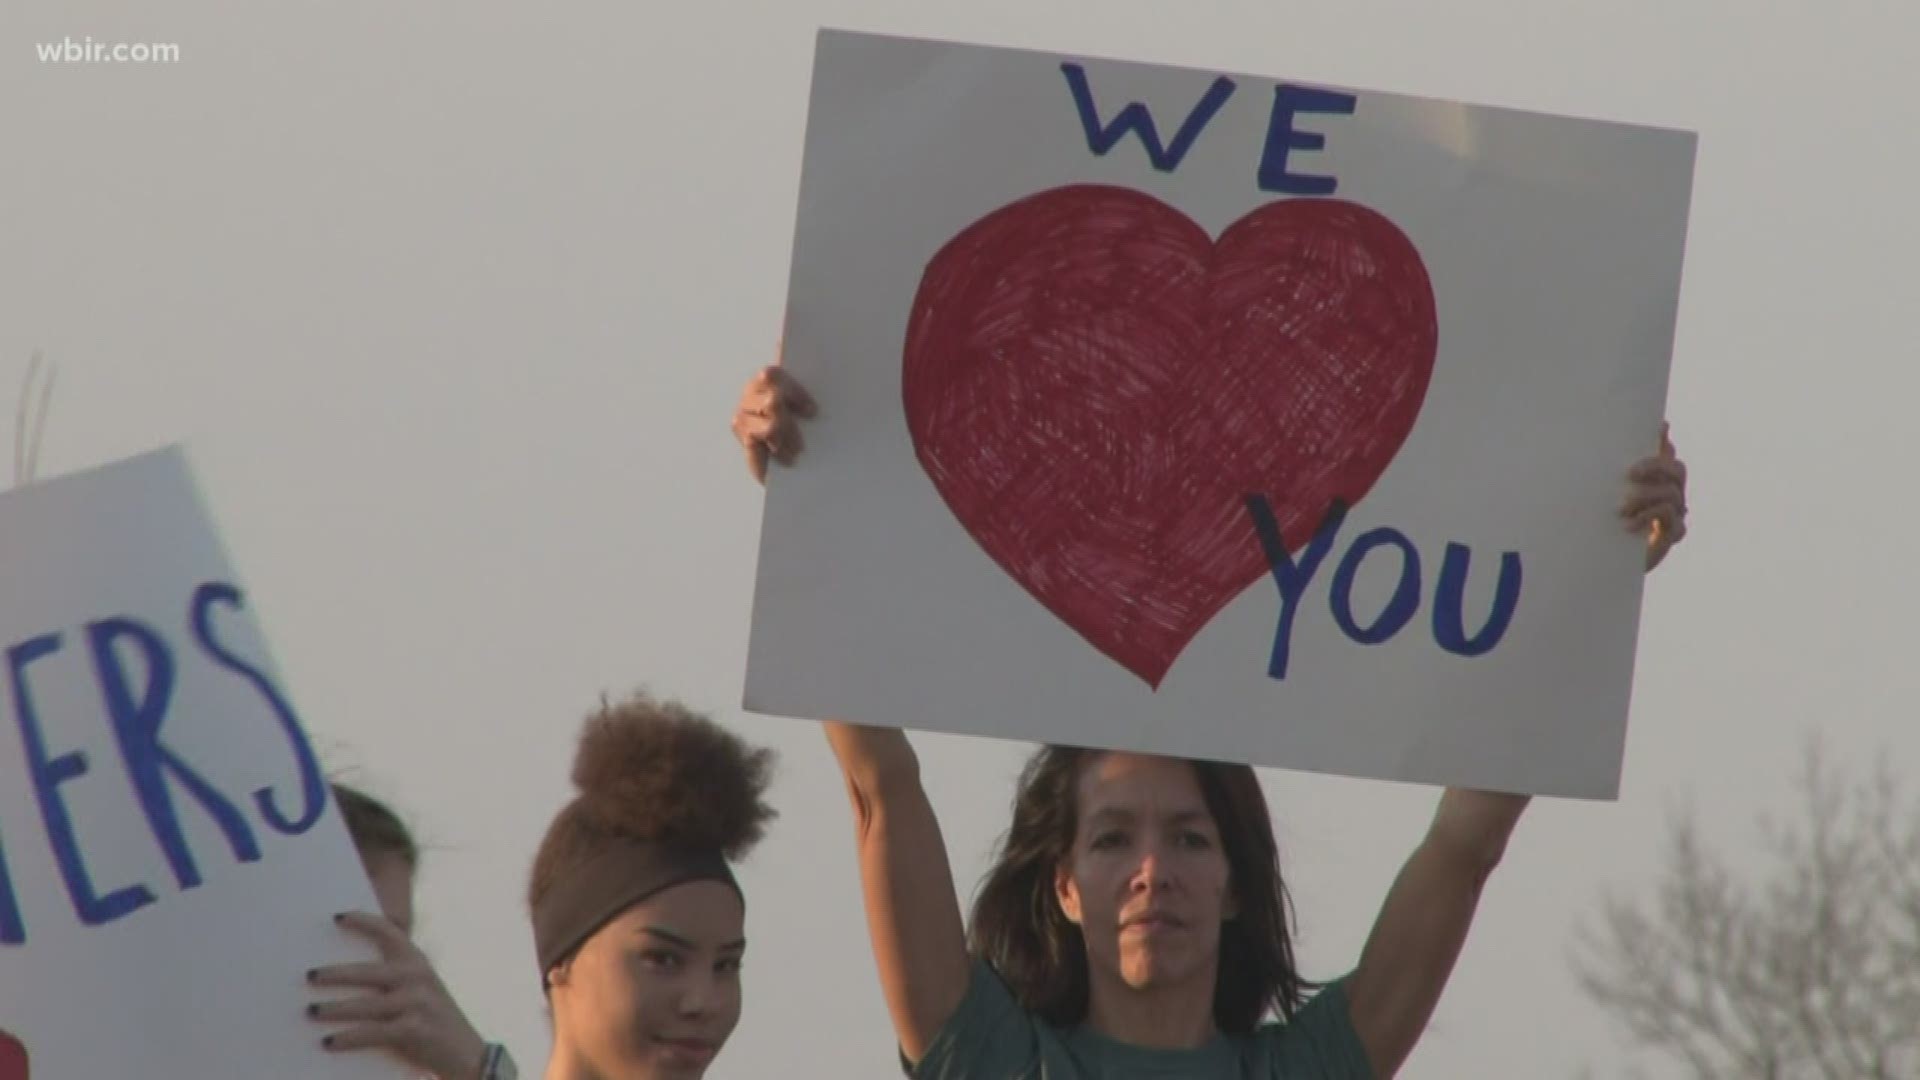 People from all over East Tennessee filled Park West Medical Center's parking lot with one message. "We see you, we love you and we support you."